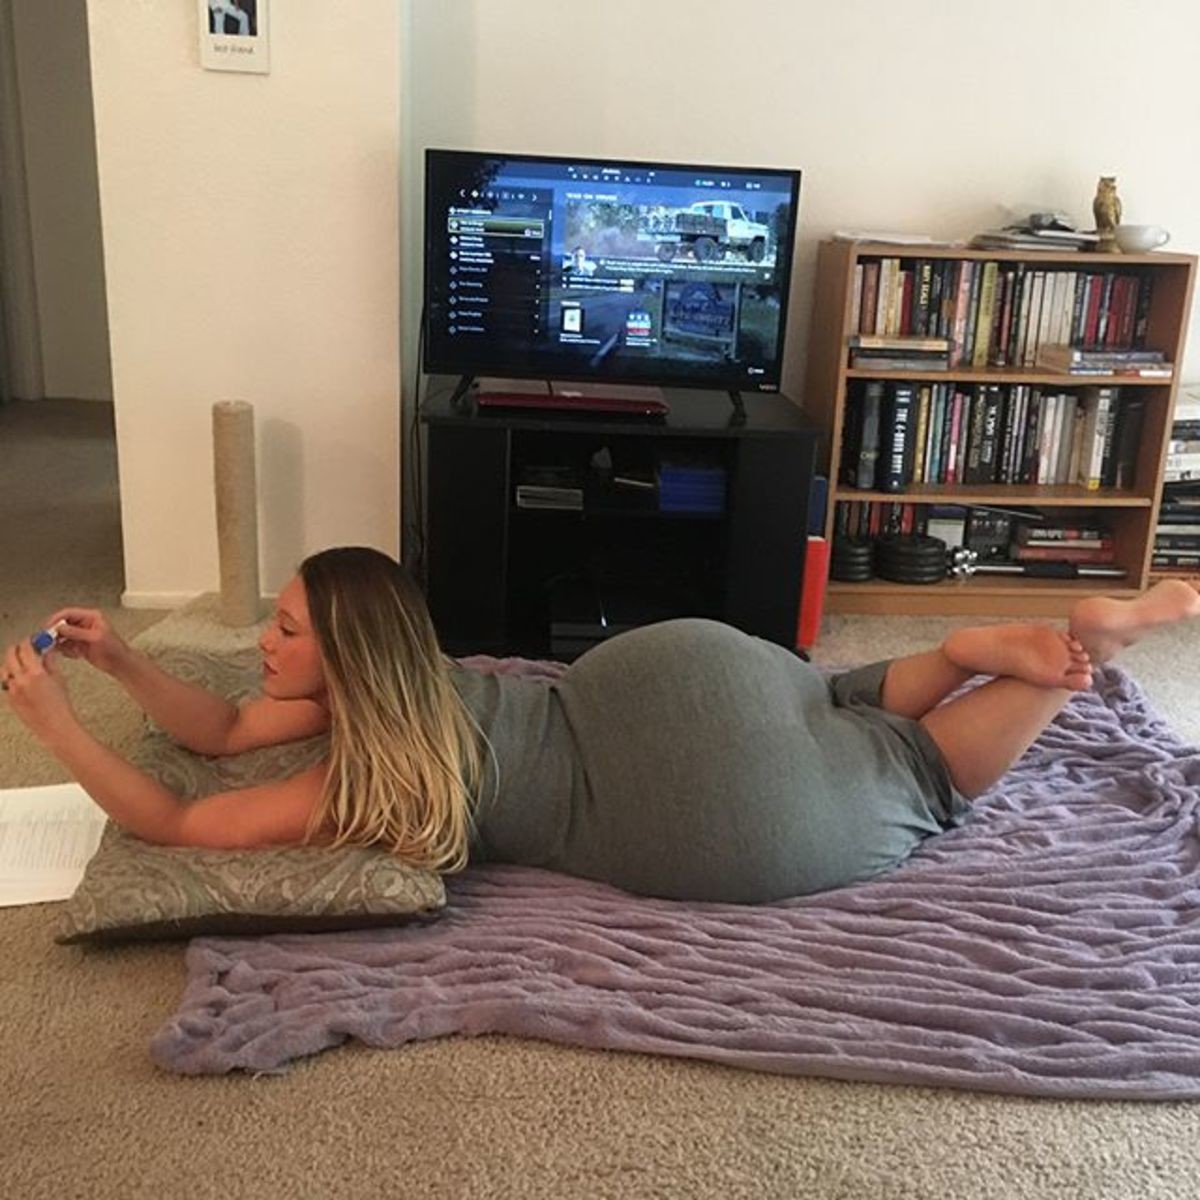 Pawg first recorded this months